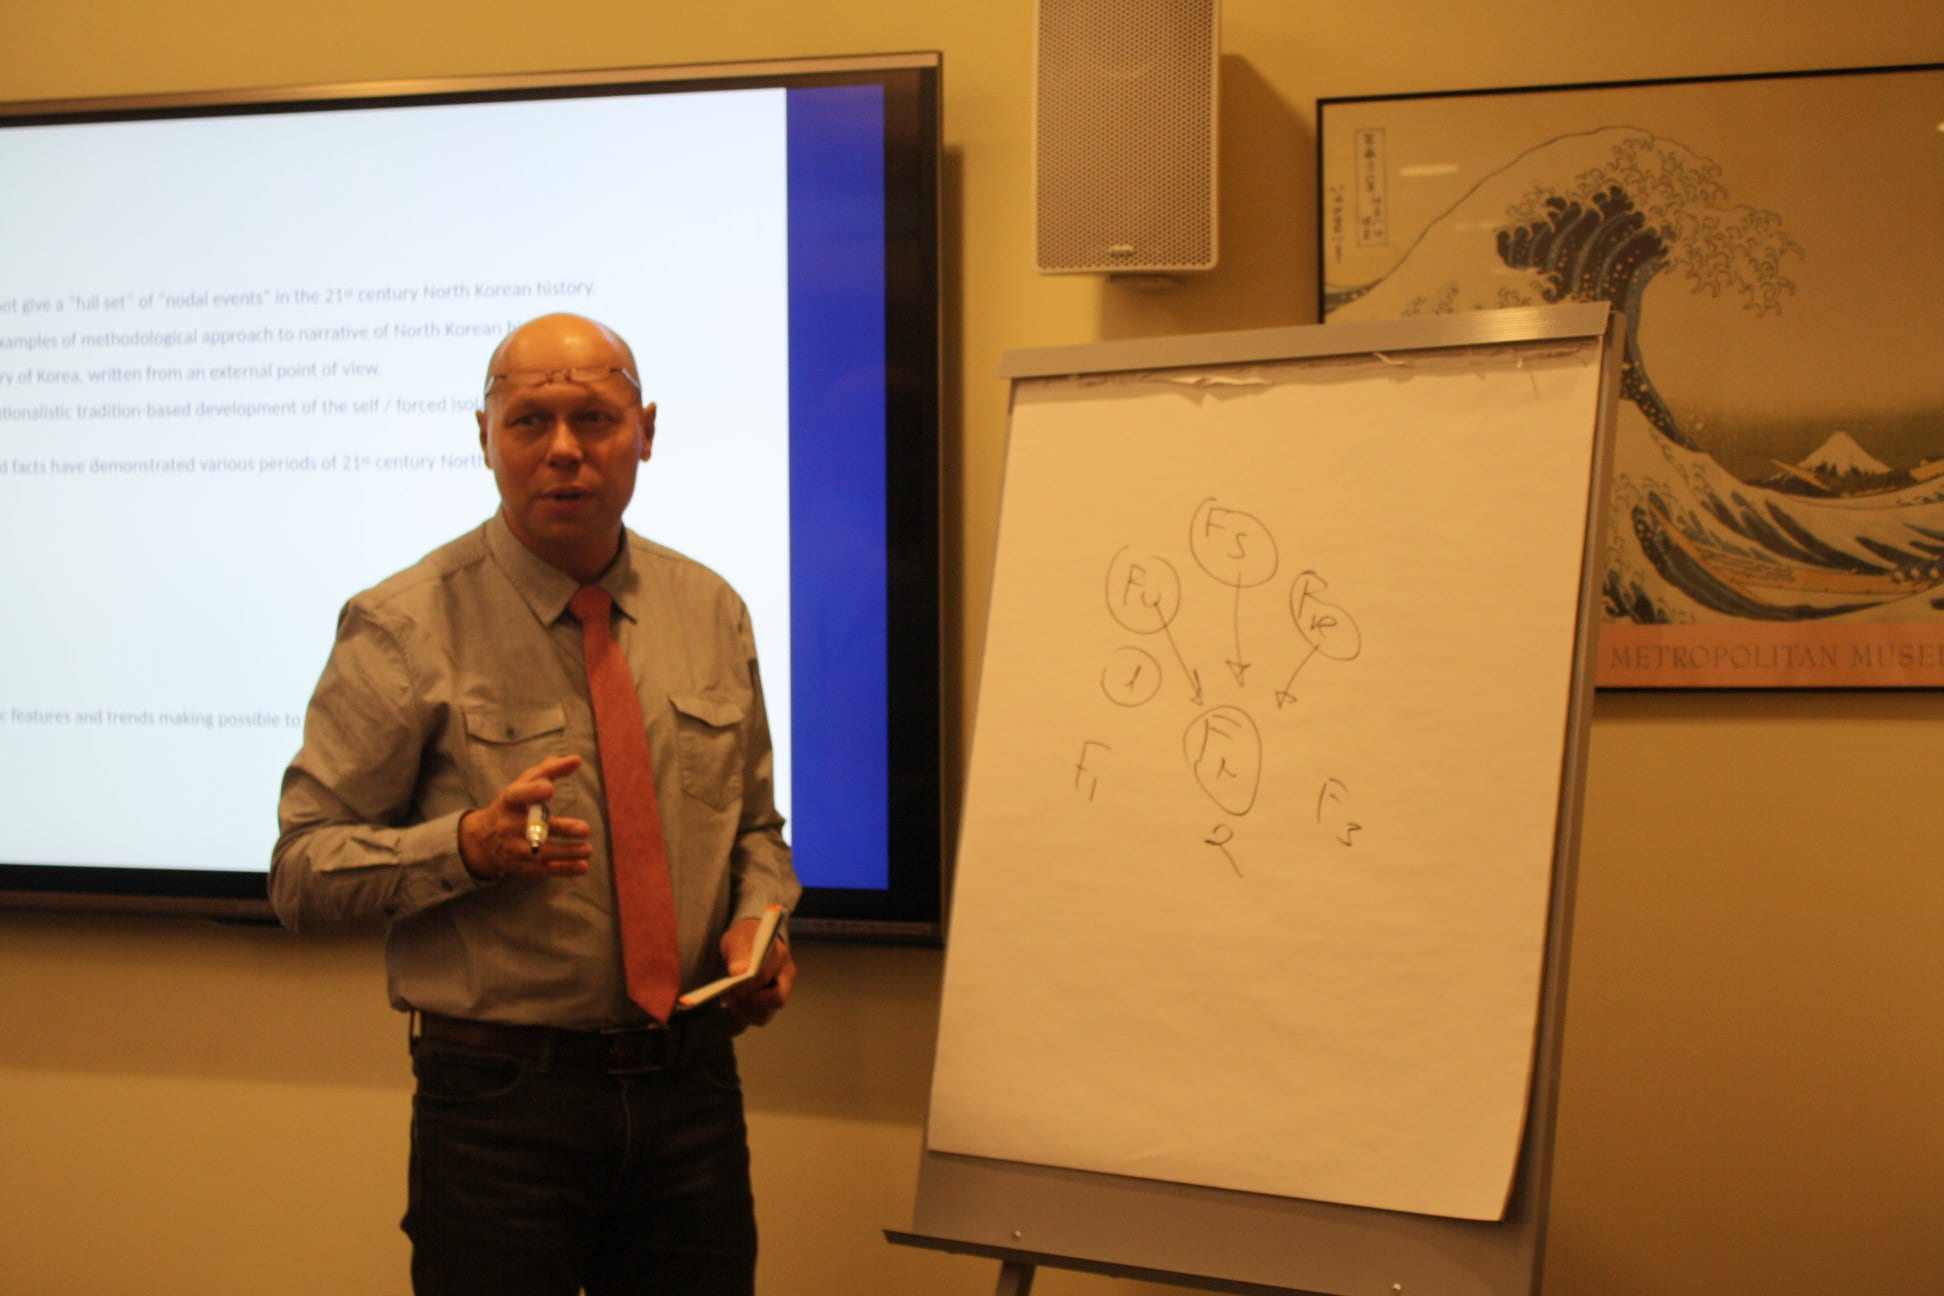 Sergei Kurbanov presenting lecture during event with a whiteboard